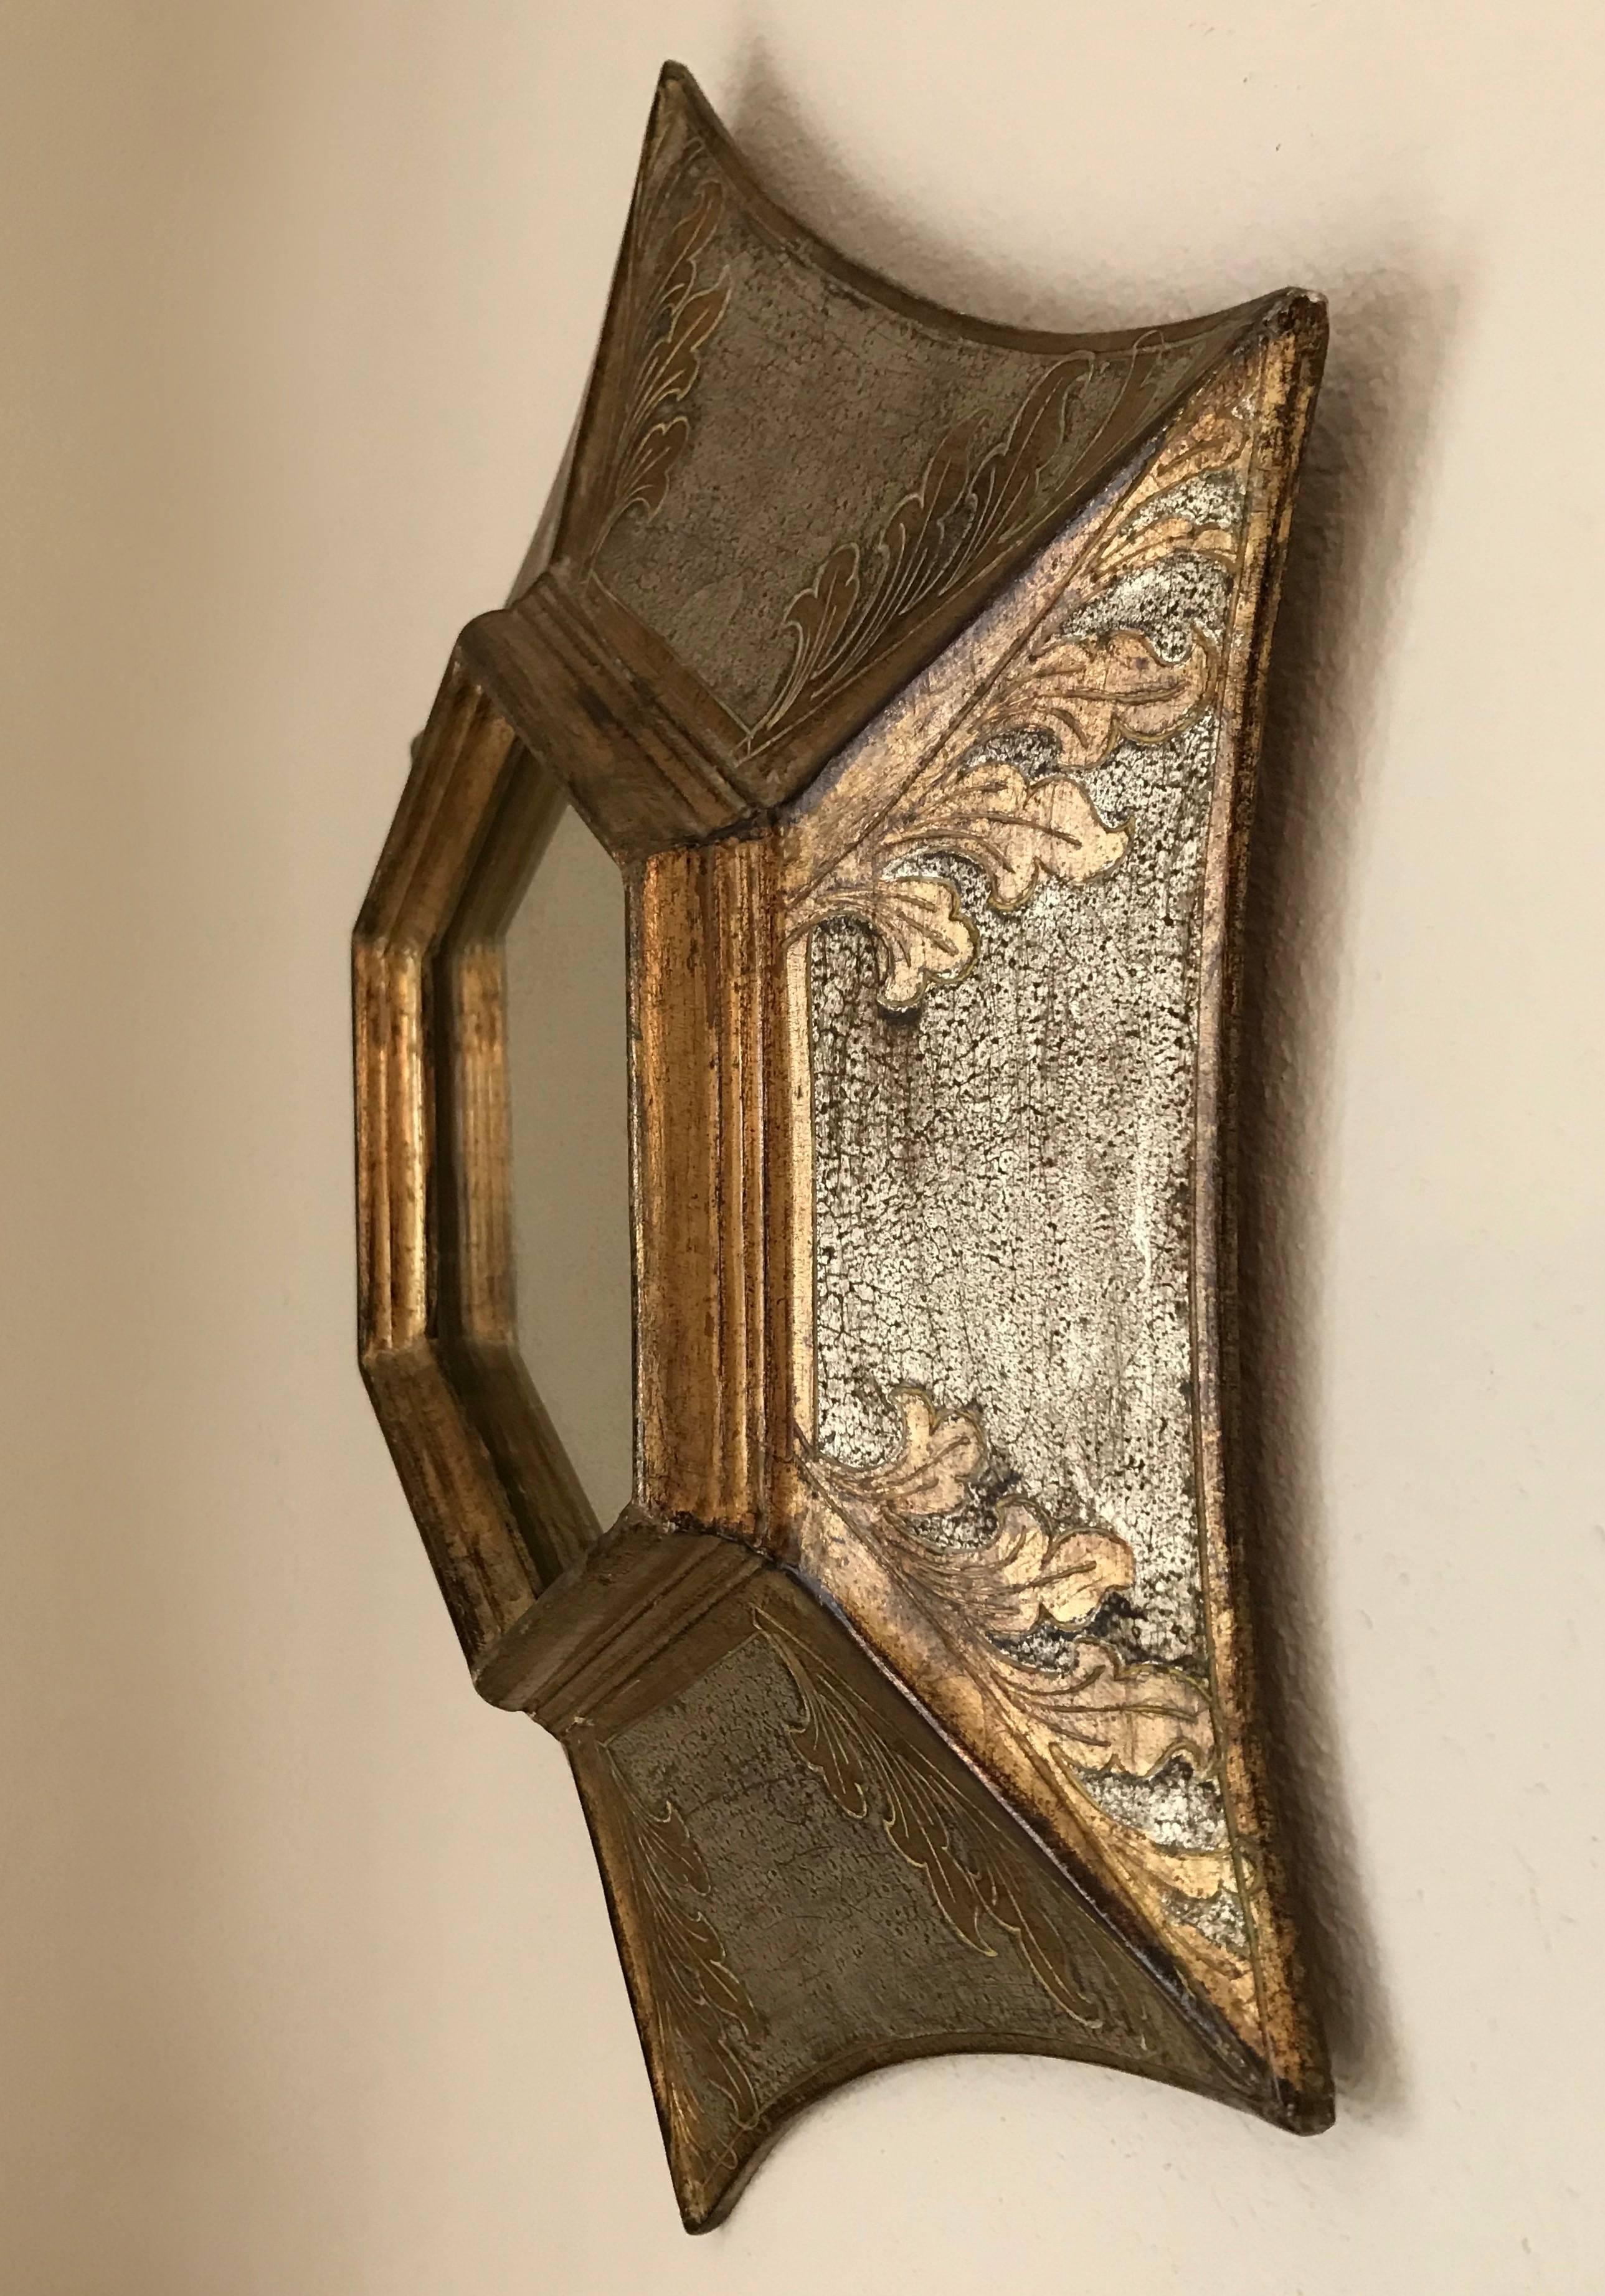 Handcrafted giltwood soleil or sunburst mirror crafted in Florence, Italy. Incised acanthus leaf motif with gold and silver leaf in an antiqued finished. Light gold specking to the back of silvered backing of inset mirror.

Measures: 19.25